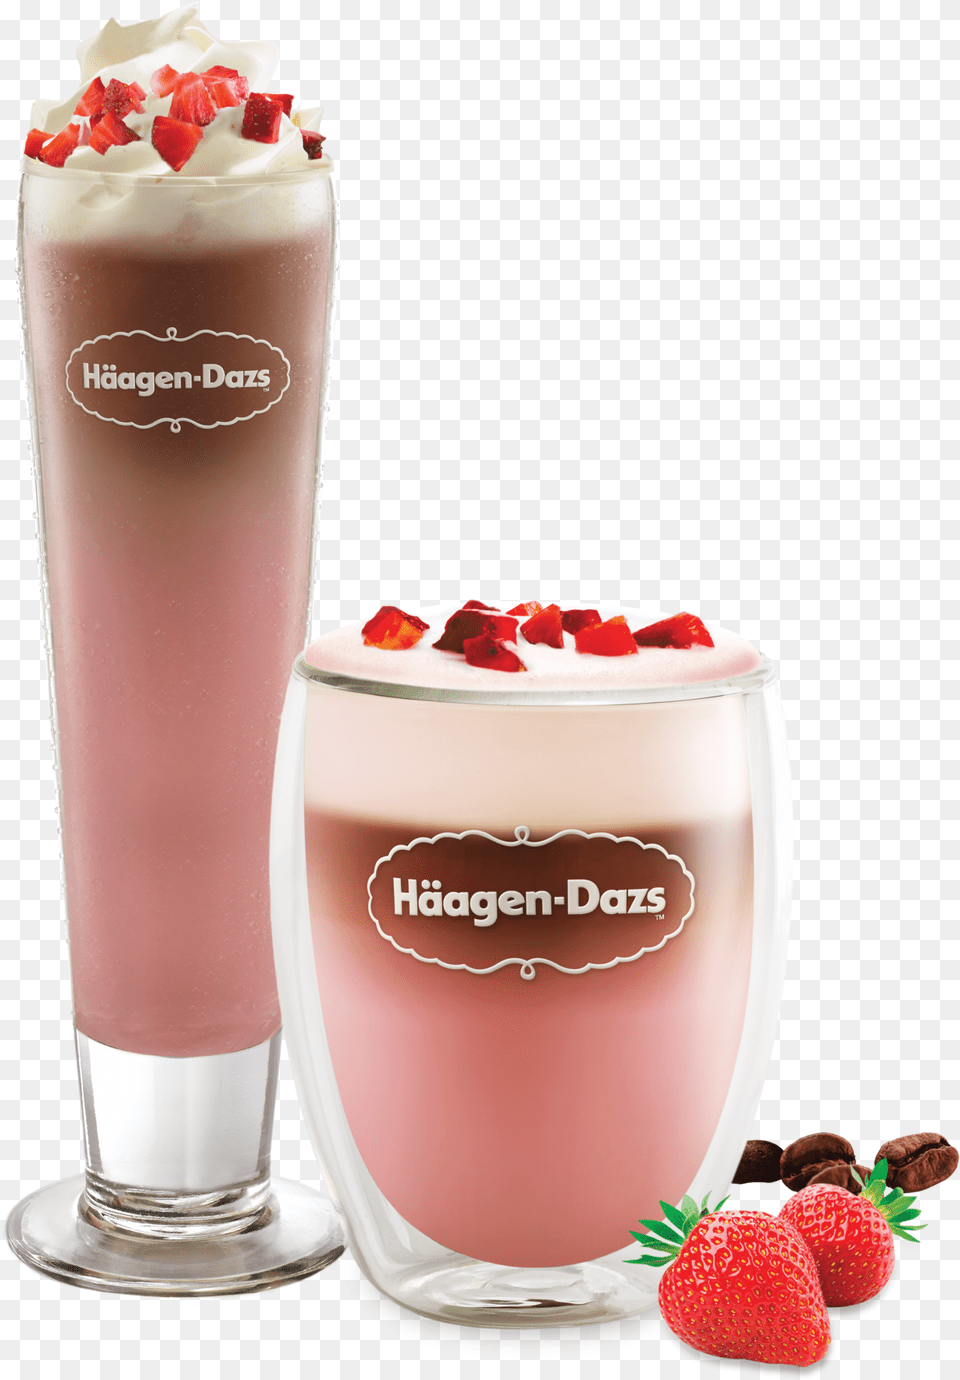 Iced Strawberry Latte Amp Coffee Iced Strawberry Latte, Smoothie, Milk, Juice, Beverage Png